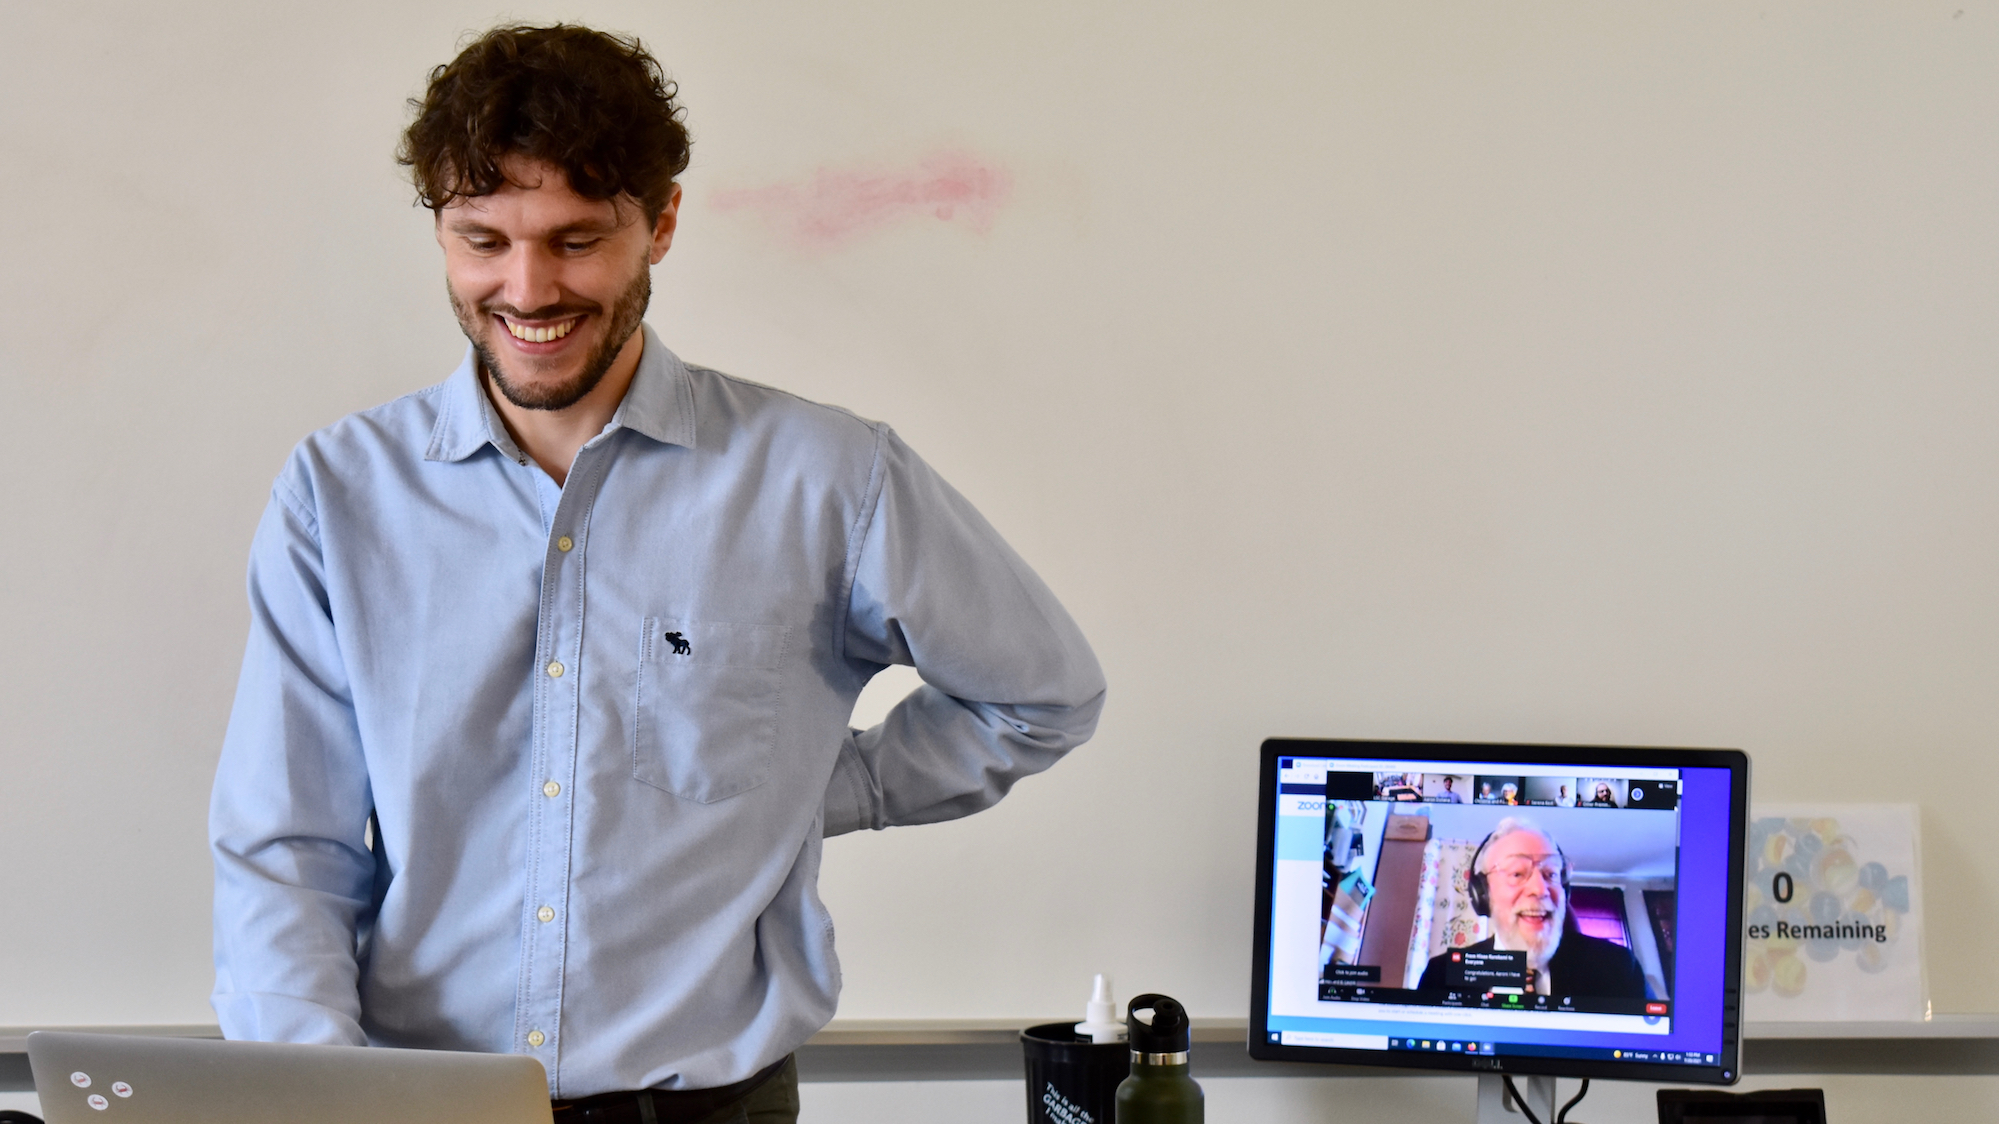 PhD student Aaron Doliana stands at the left, looking down at a laptop screen, smiling, while behind him on the right, another computer displays what Aaron sees, his advisor Howard Lasnik smiling back.